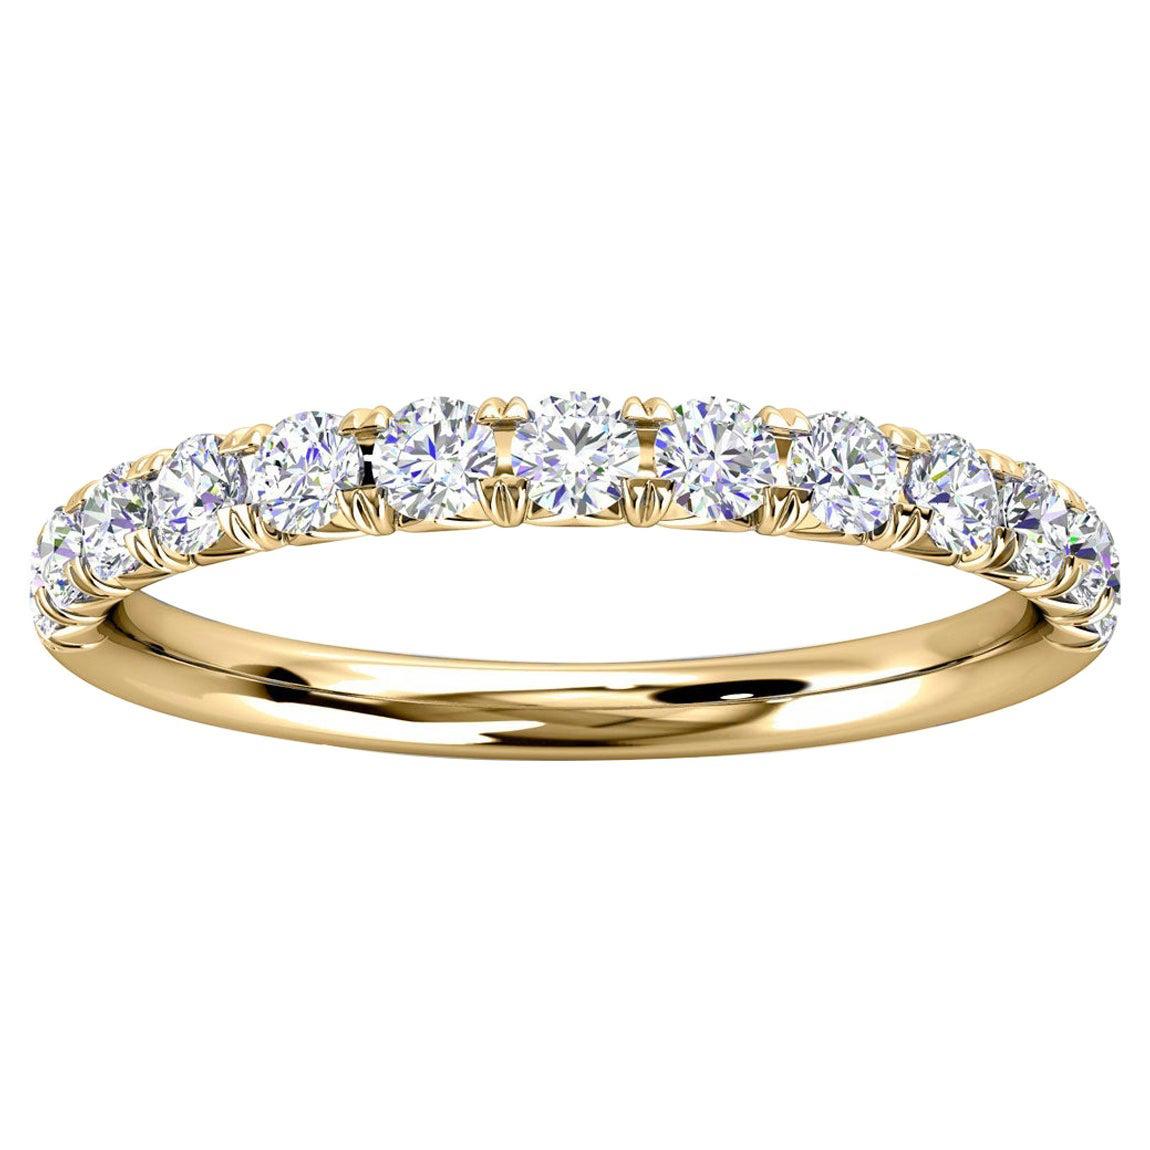 For Sale:  14K Yellow Gold Voyage French Pave Diamond Ring '1/3 Ct. Tw'